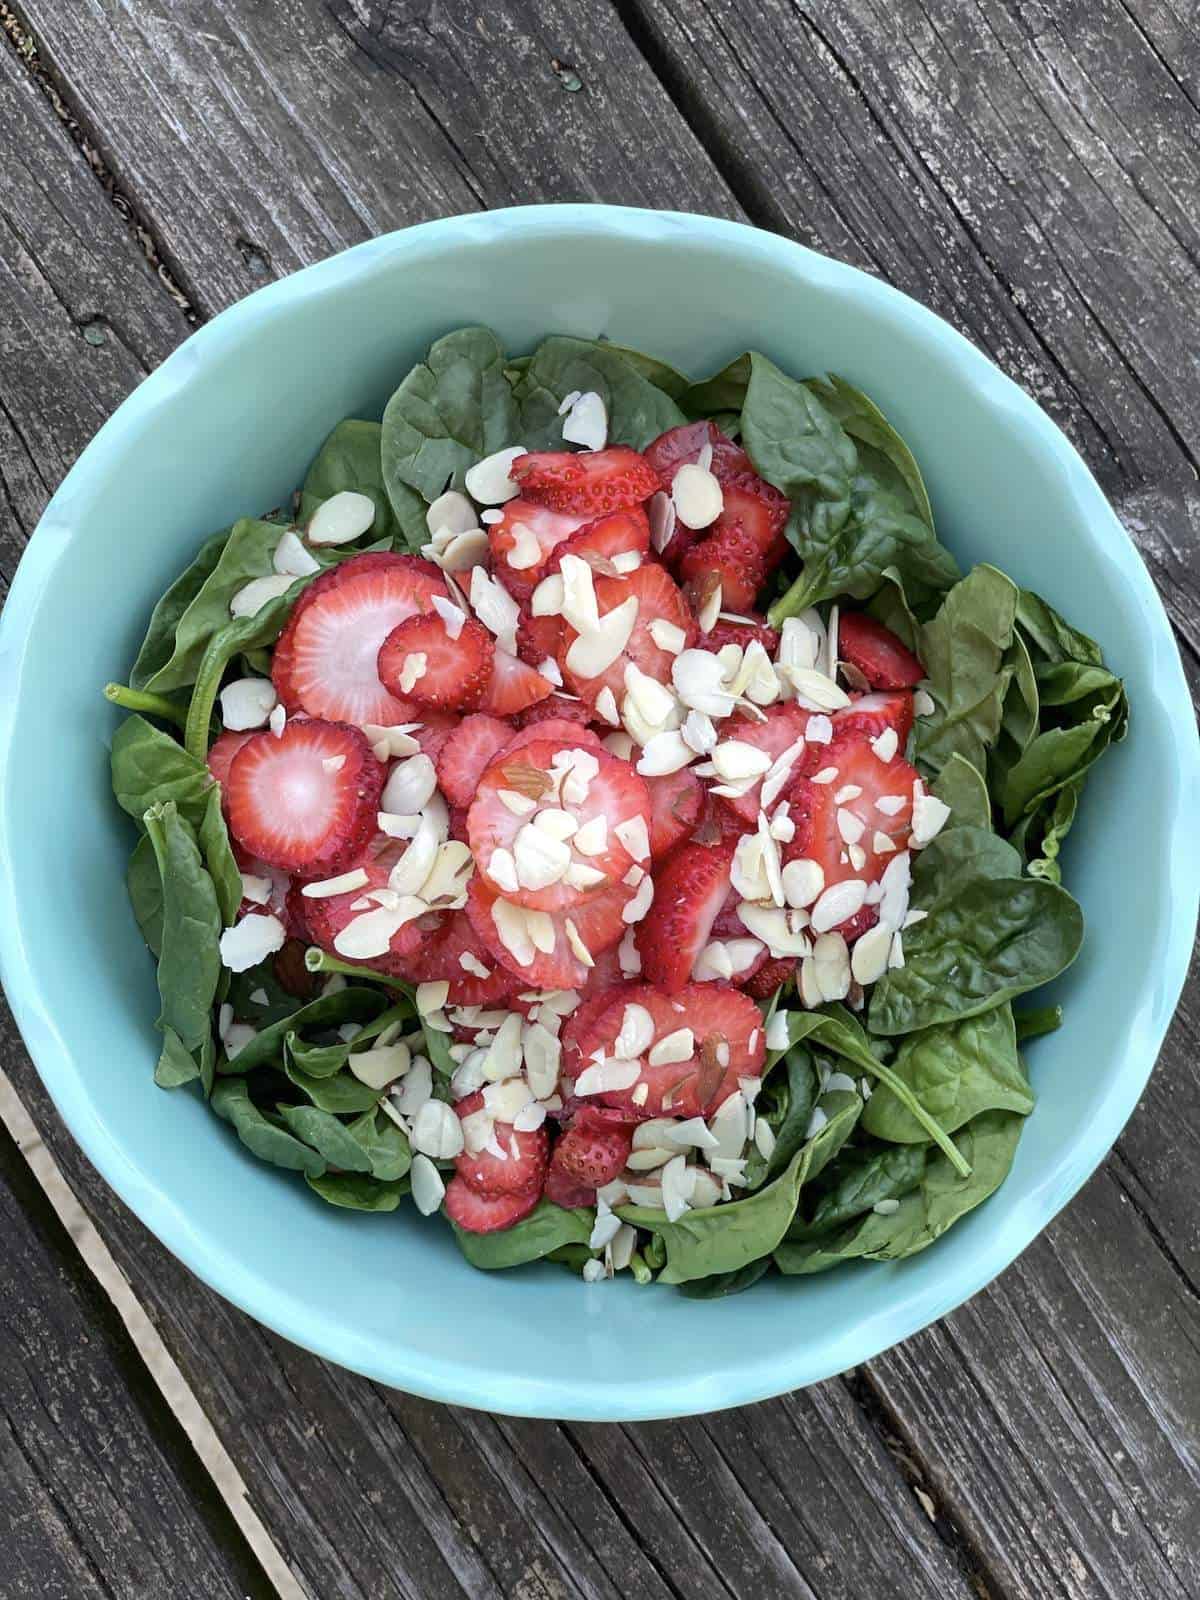 A bowl of spinach with strawberries and almonds on top for strawberry spinach salad.